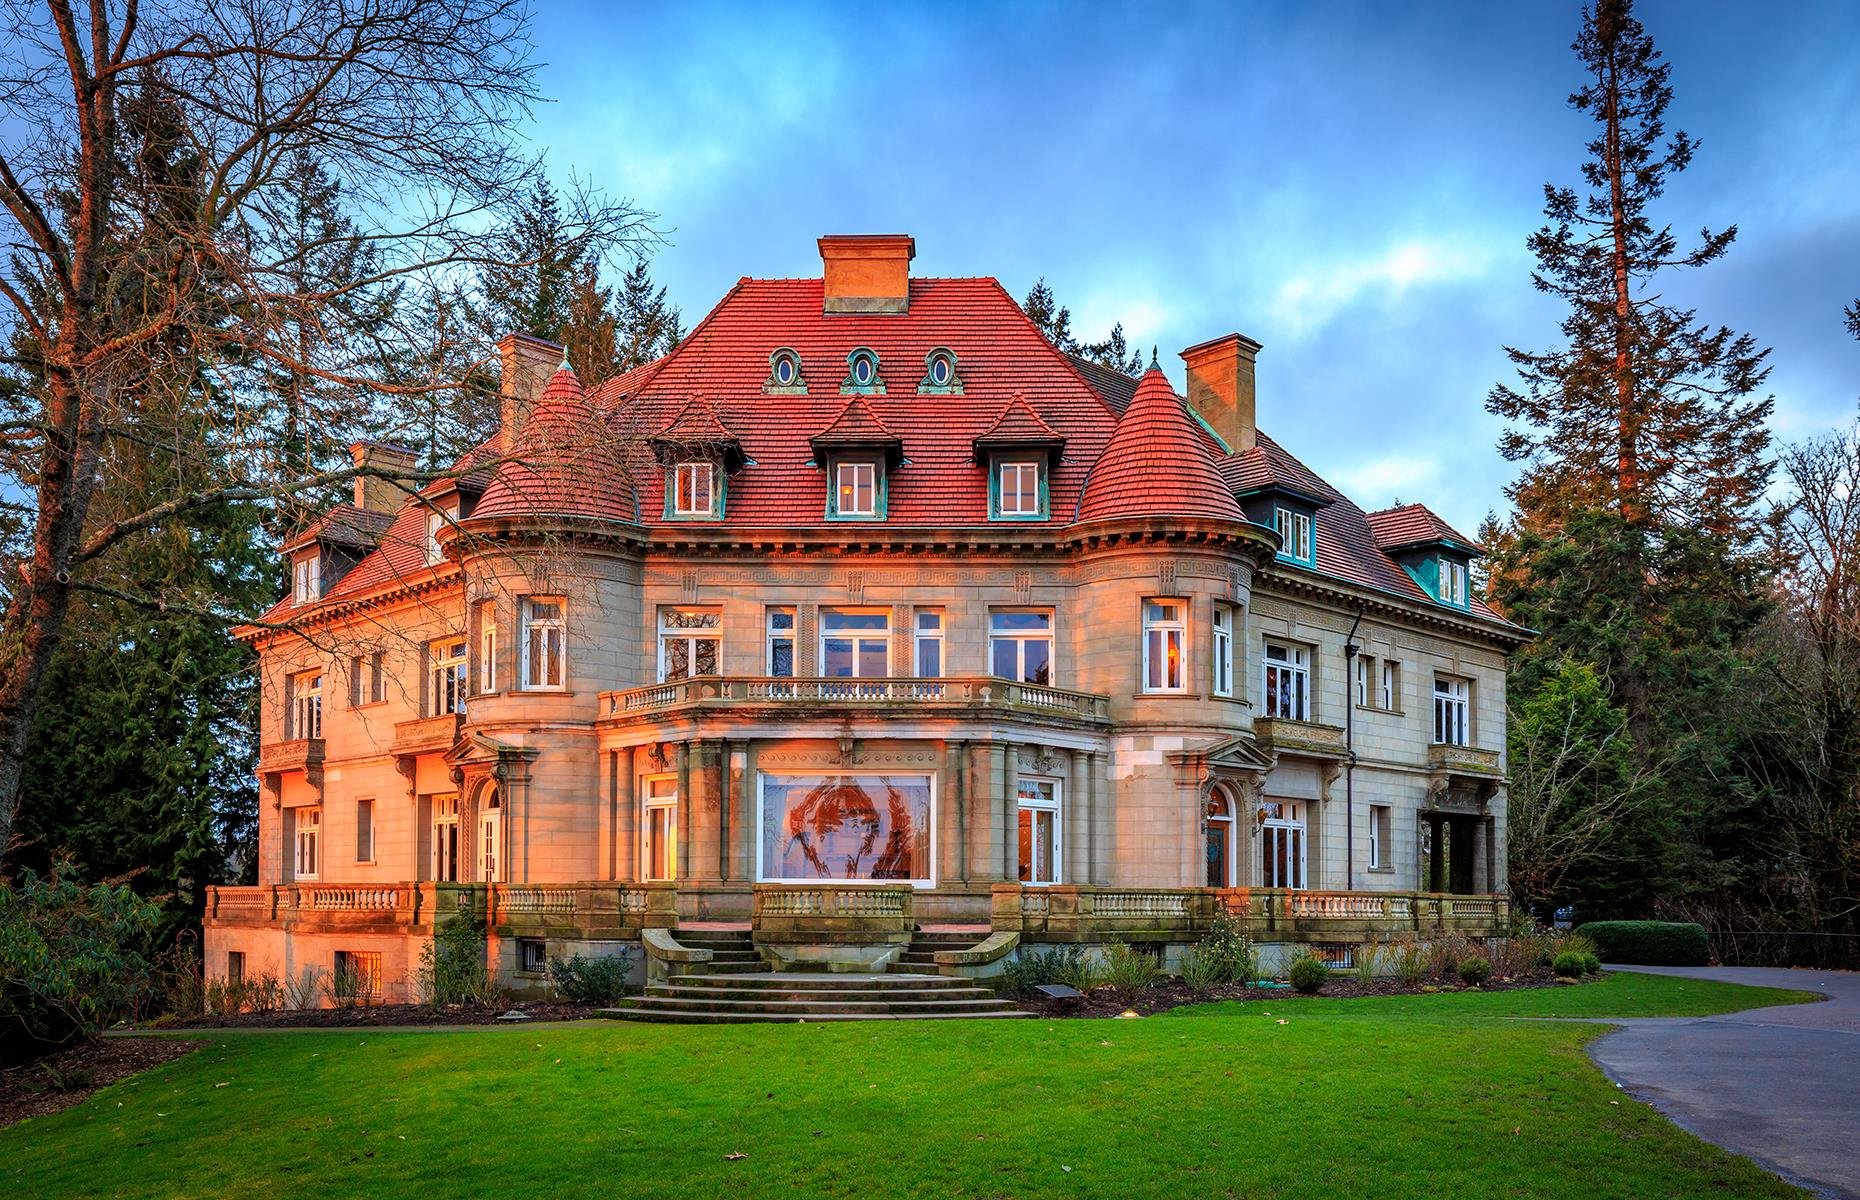 <p>Built by Henry and Georgina Pittock, two prominent Portland residents in the early 1900s, this mansion is a striking vision of French Renaissance architecture. Surrounded by nature, the mansion is open to the public, allowing visitors to explore multiple rooms, the Pittock family's private art collection and venture out into the landscaped gardens.</p>  <p><a href="https://www.loveexploring.com/galleries/79834/most-unusual-places-to-stay-in-the-world?page=1"><strong>The most unusual places to stay in the world</strong></a></p>